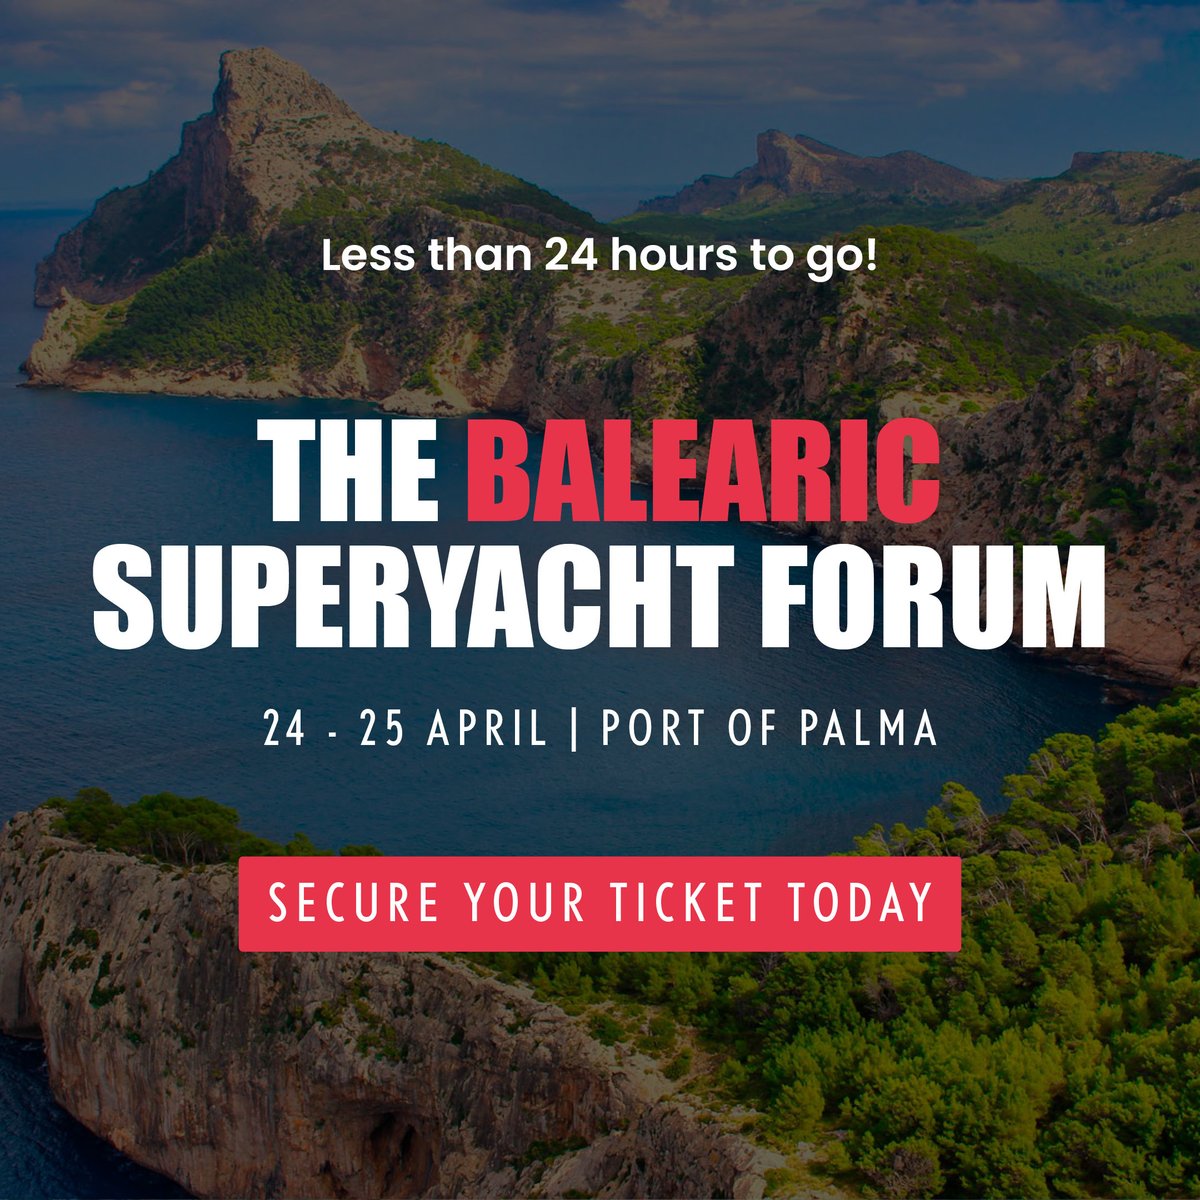 With less than 24 hours to go until The Balearic Superyacht Forum, the countdown is on! Prepare yourselves for what will be an incredible event. See you there! #TheBalearicSuperyachtForum #Event #Connection #yachting